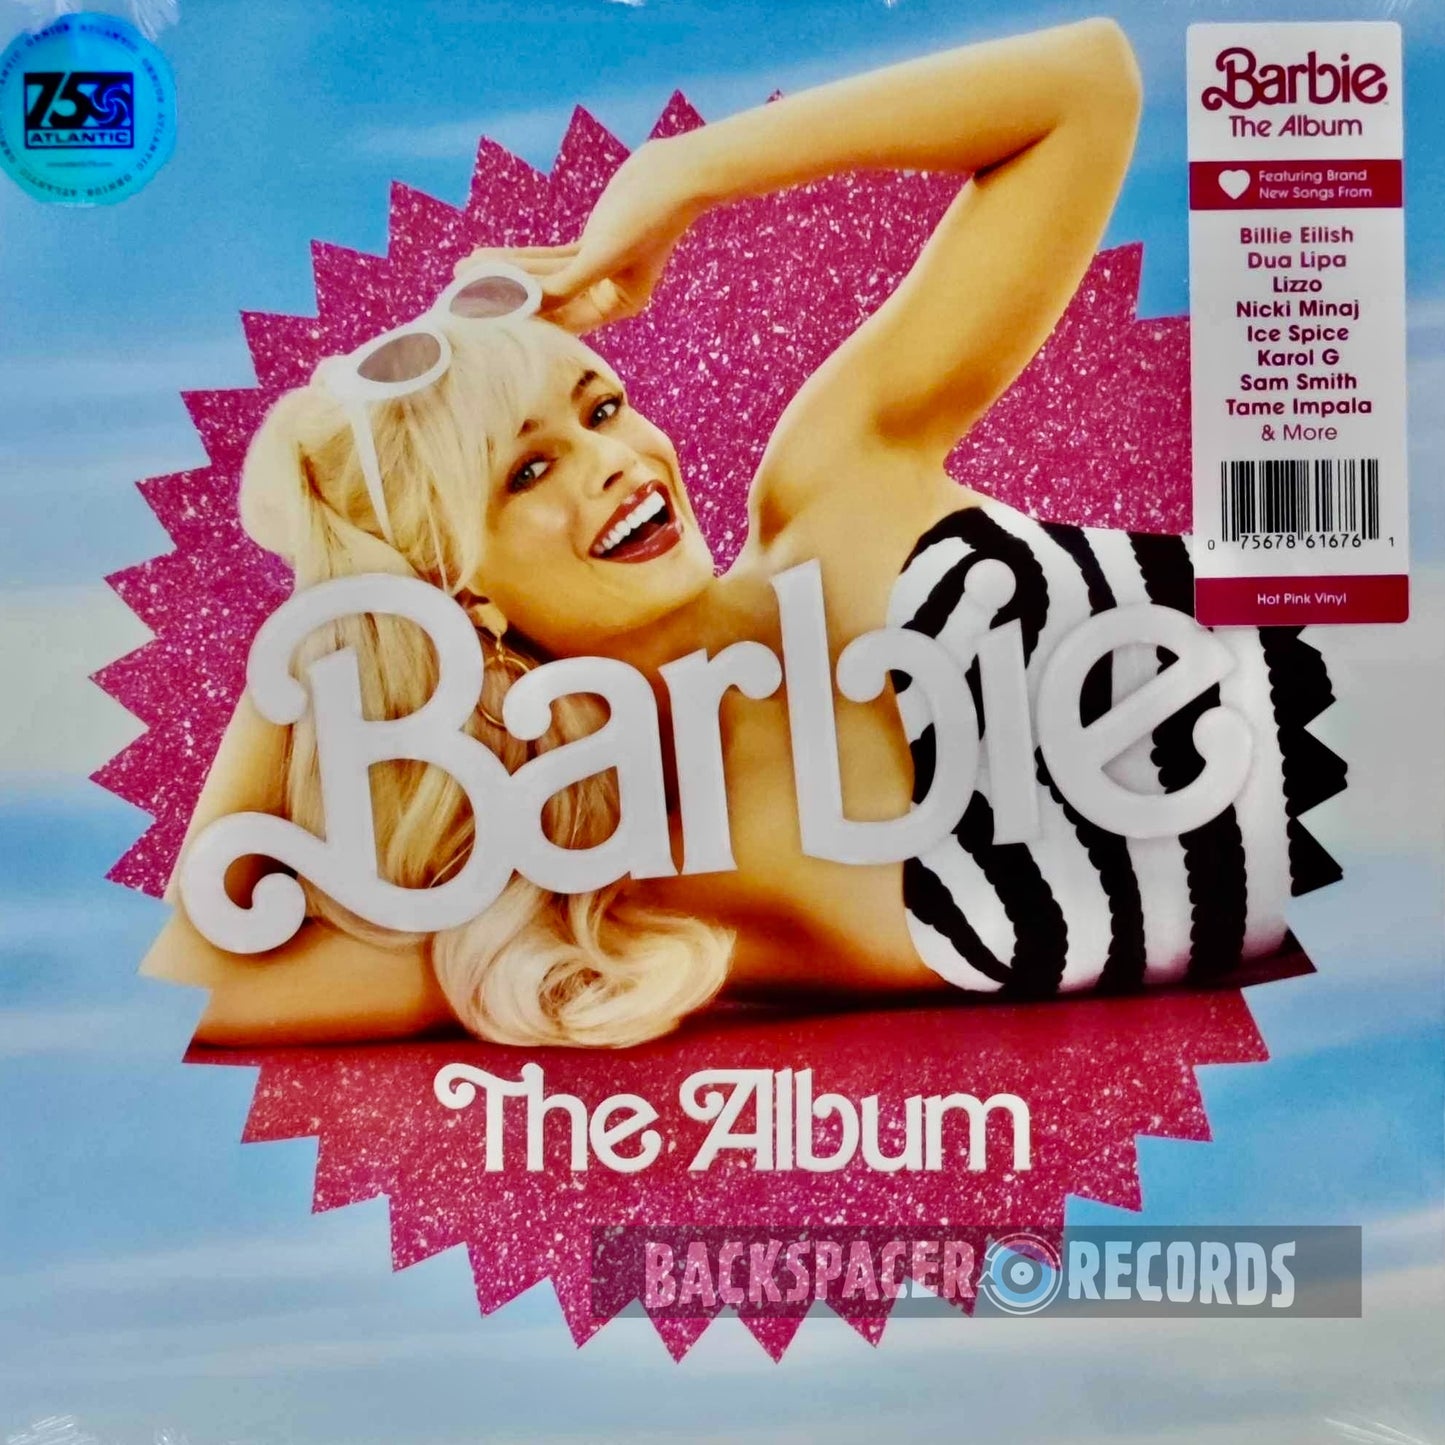 Barbie The Album - Various Artists (Limited Edition) LP (Sealed)